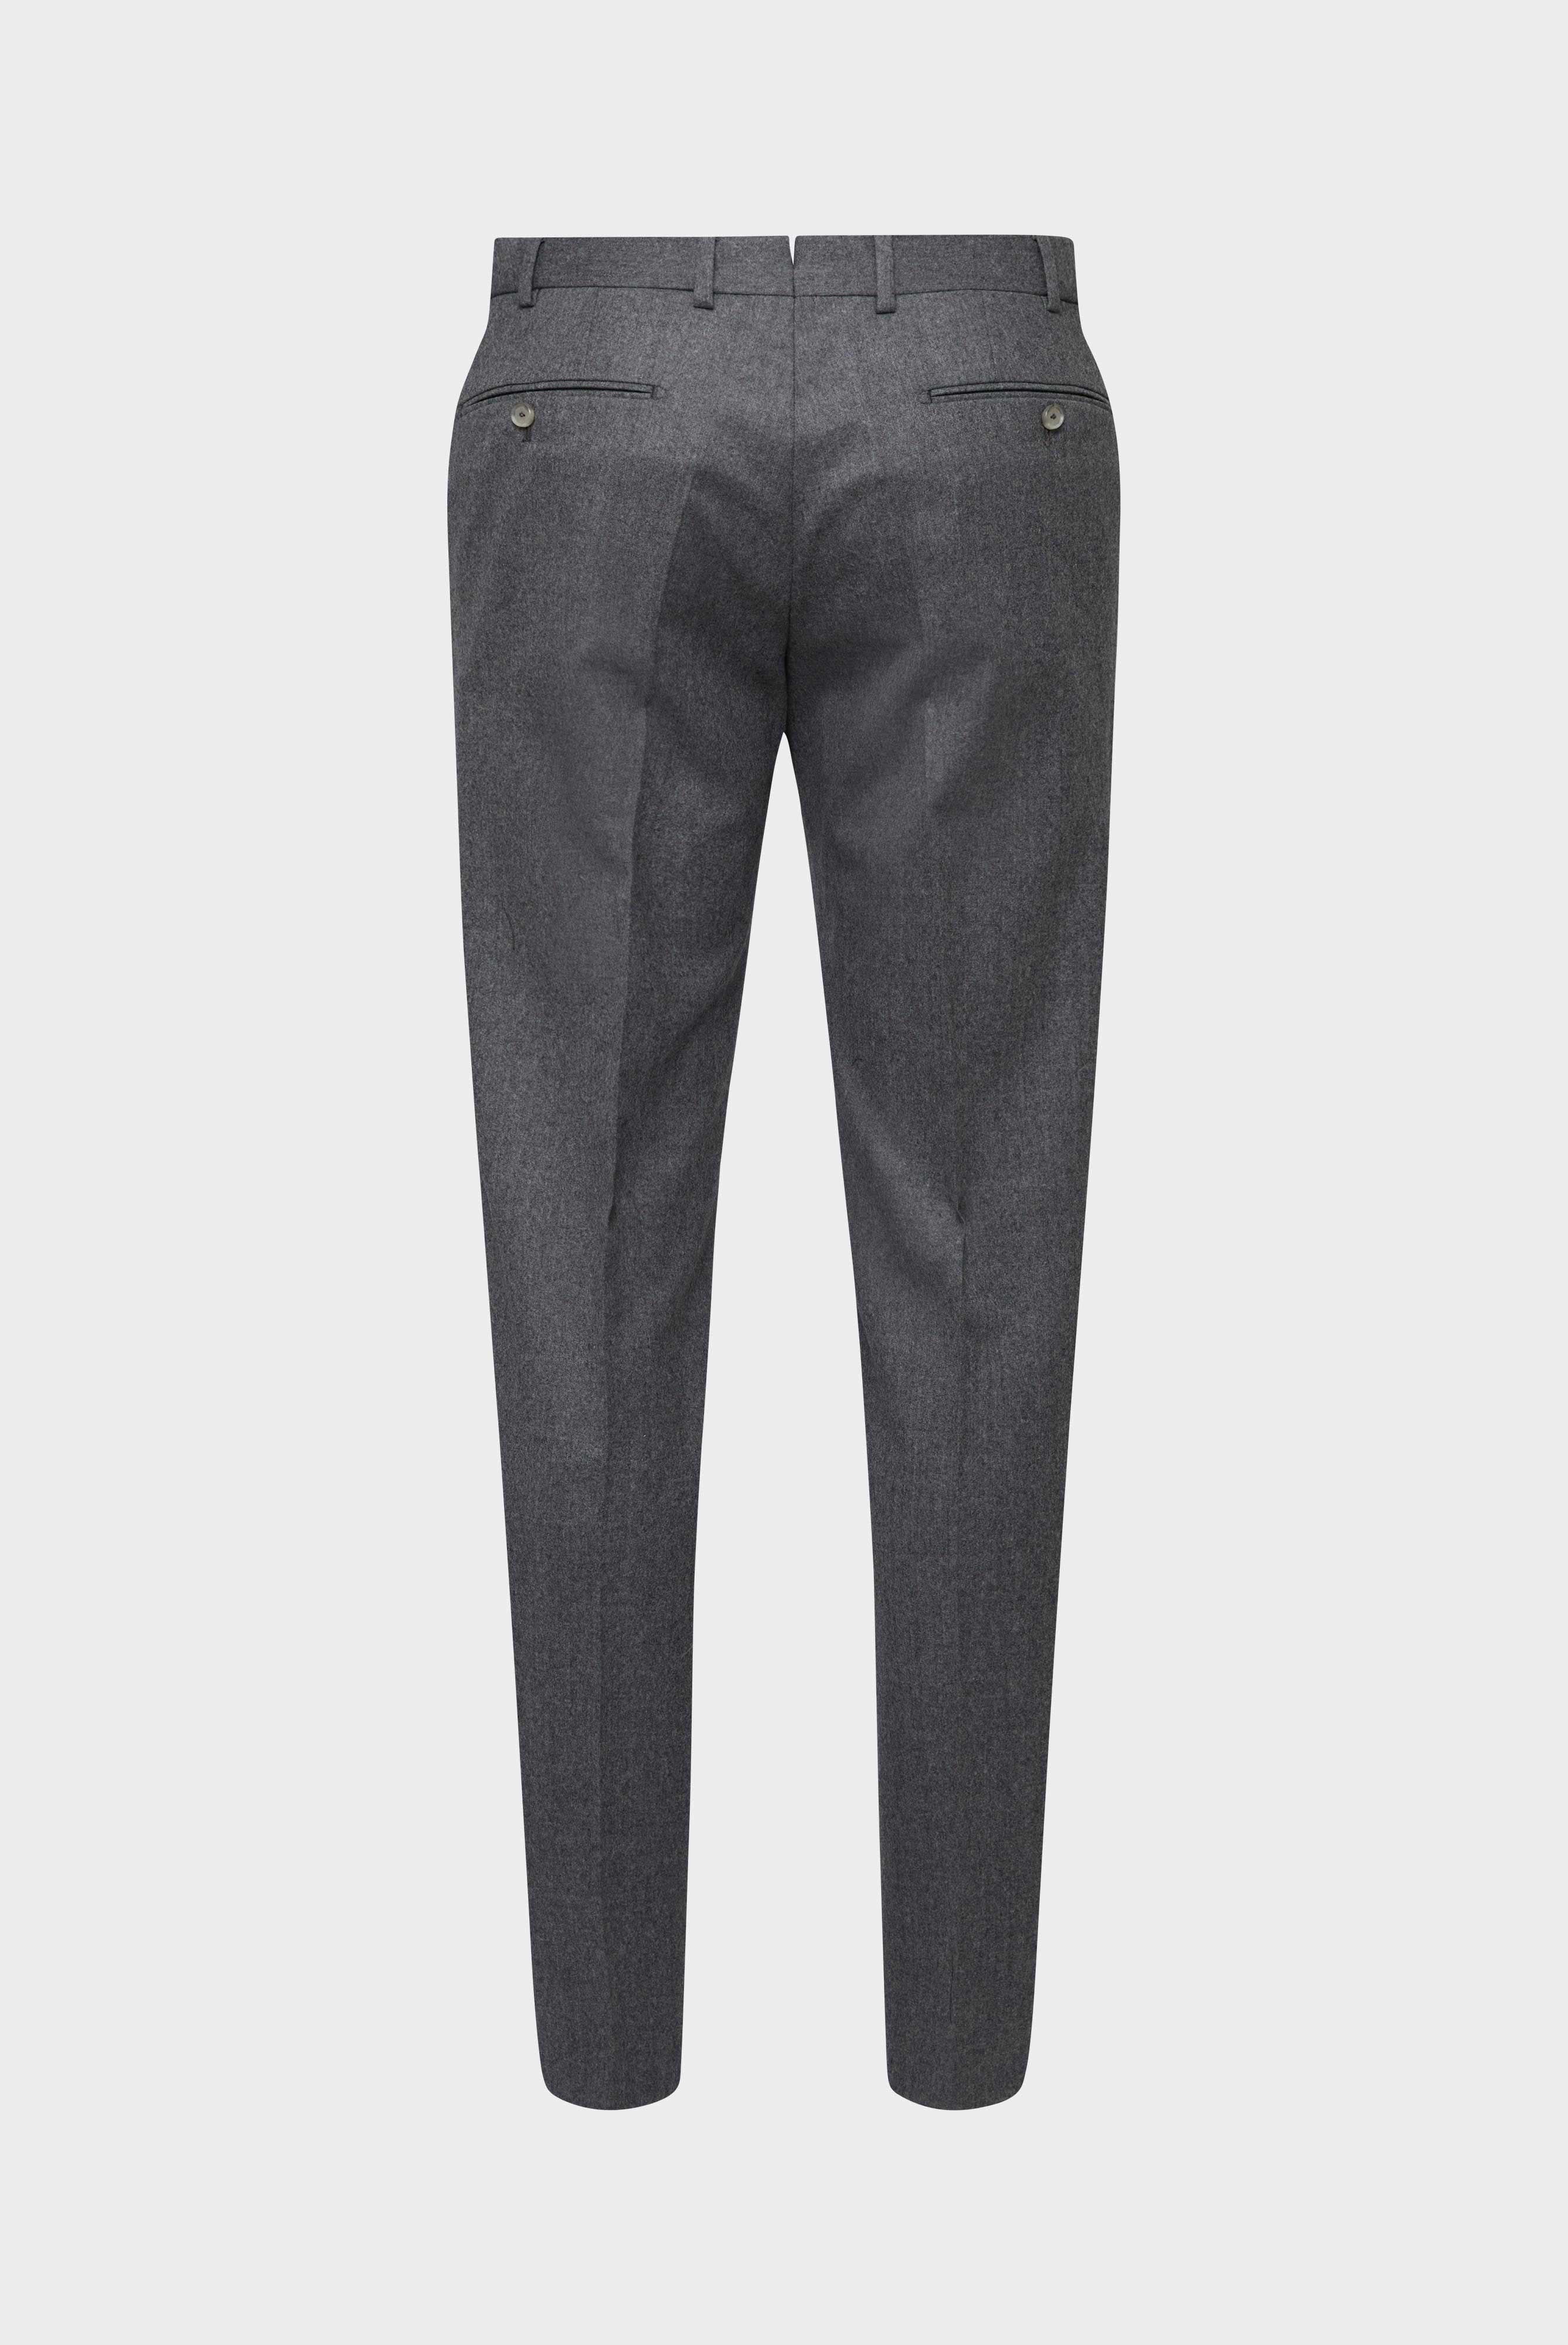 Jeans & Trousers+Wool-Flanell Trousers Slim Fit+20.7854.16.H00029.040.48